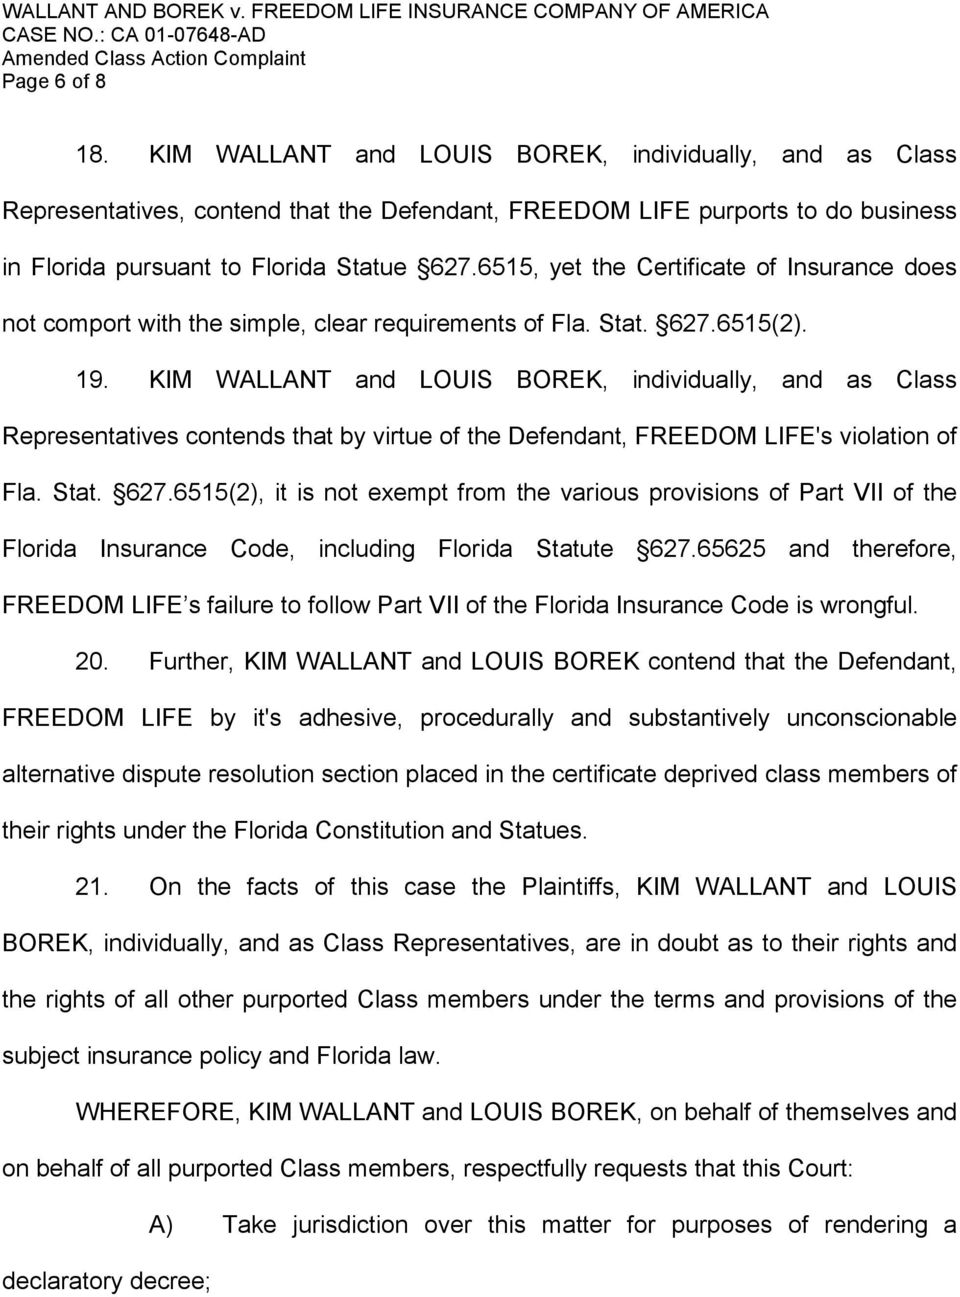 KIM WALLANT and LOUIS BOREK, individually, and as Class Representatives contends that by virtue of the Defendant, FREEDOM LIFE's violation of Fla. Stat. 627.